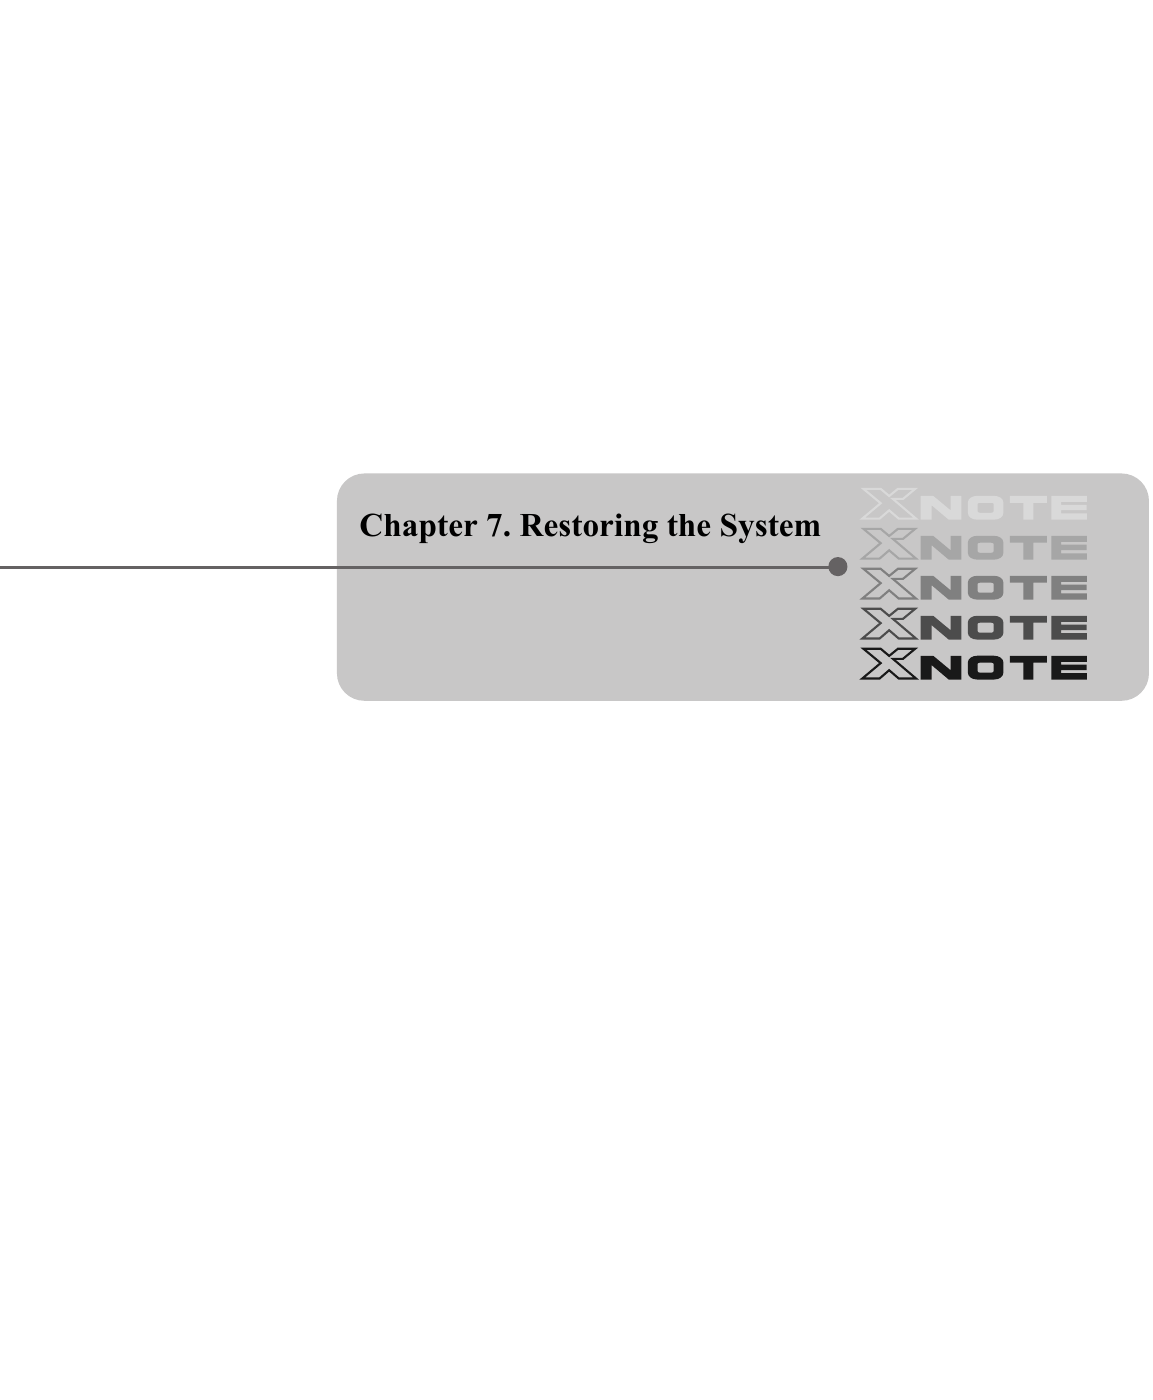 Chapter 7. Restoring the System